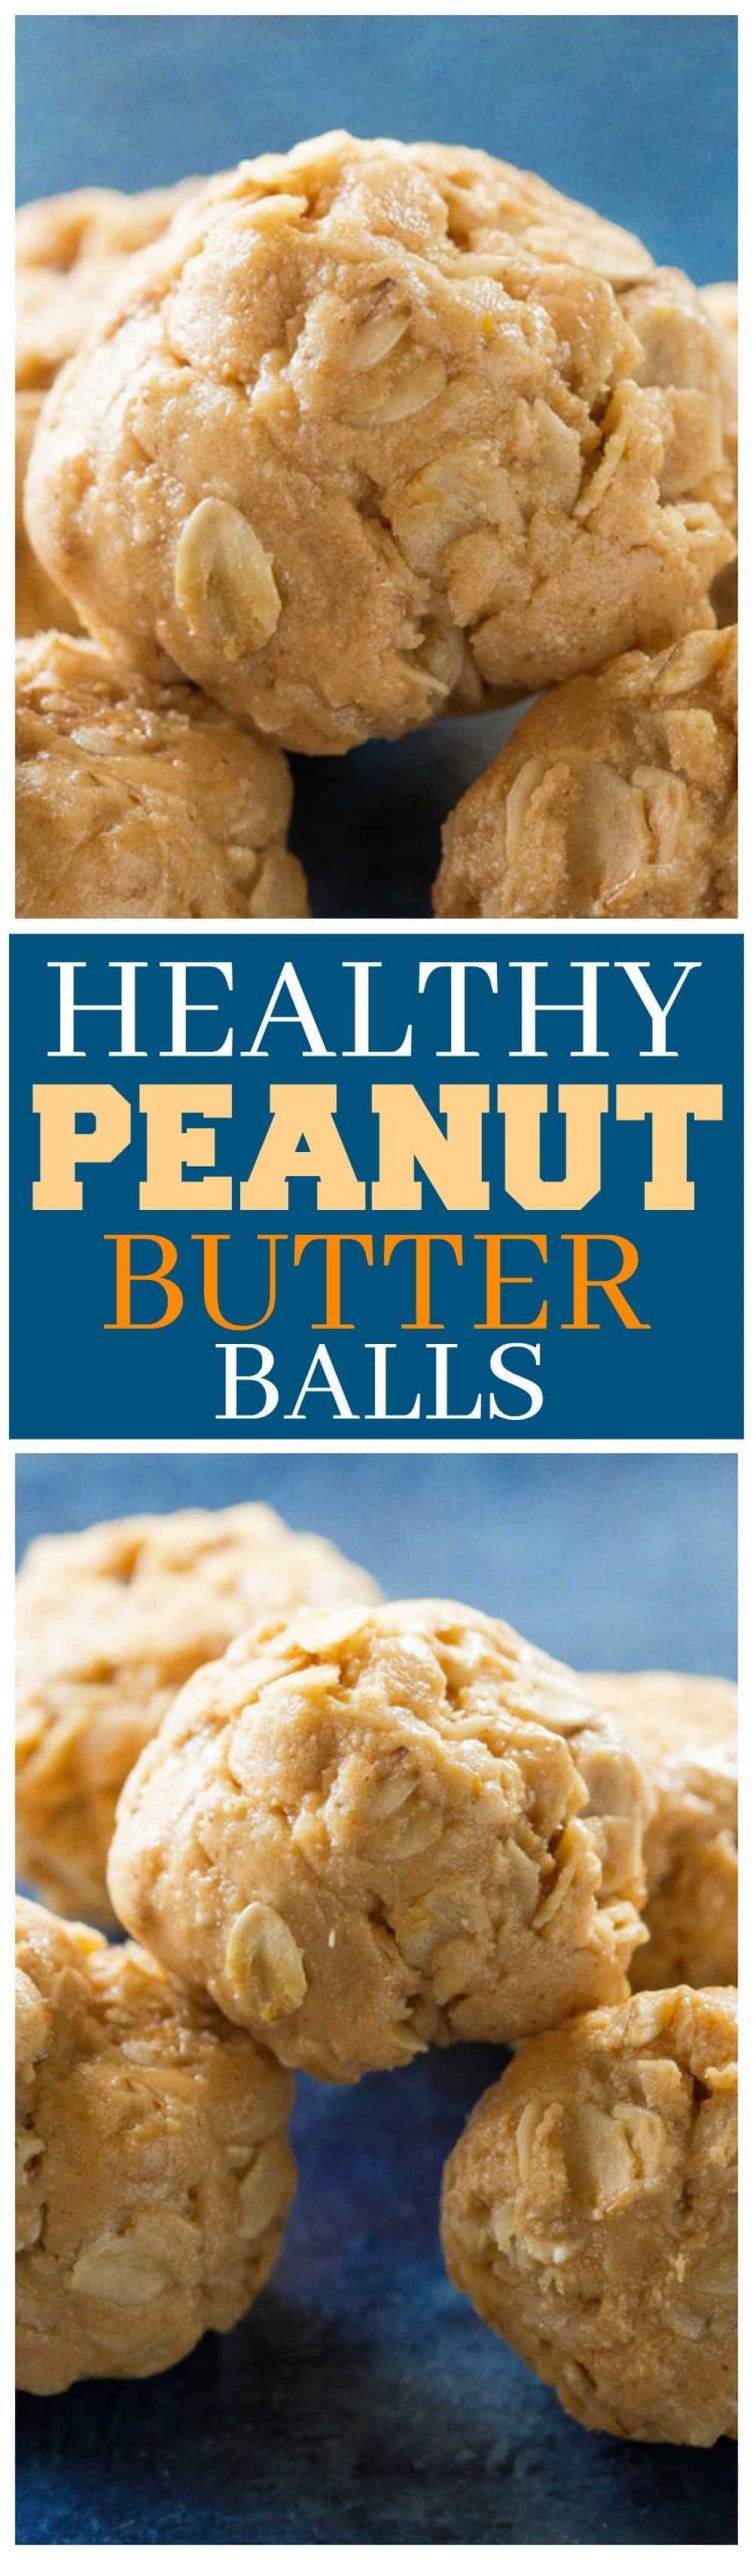 These Healthy Peanut Butter Balls are a great after school snack for your kids or for adults. Simple ingredients in these little energy balls. #healthy #peanutbutter #balls #snack